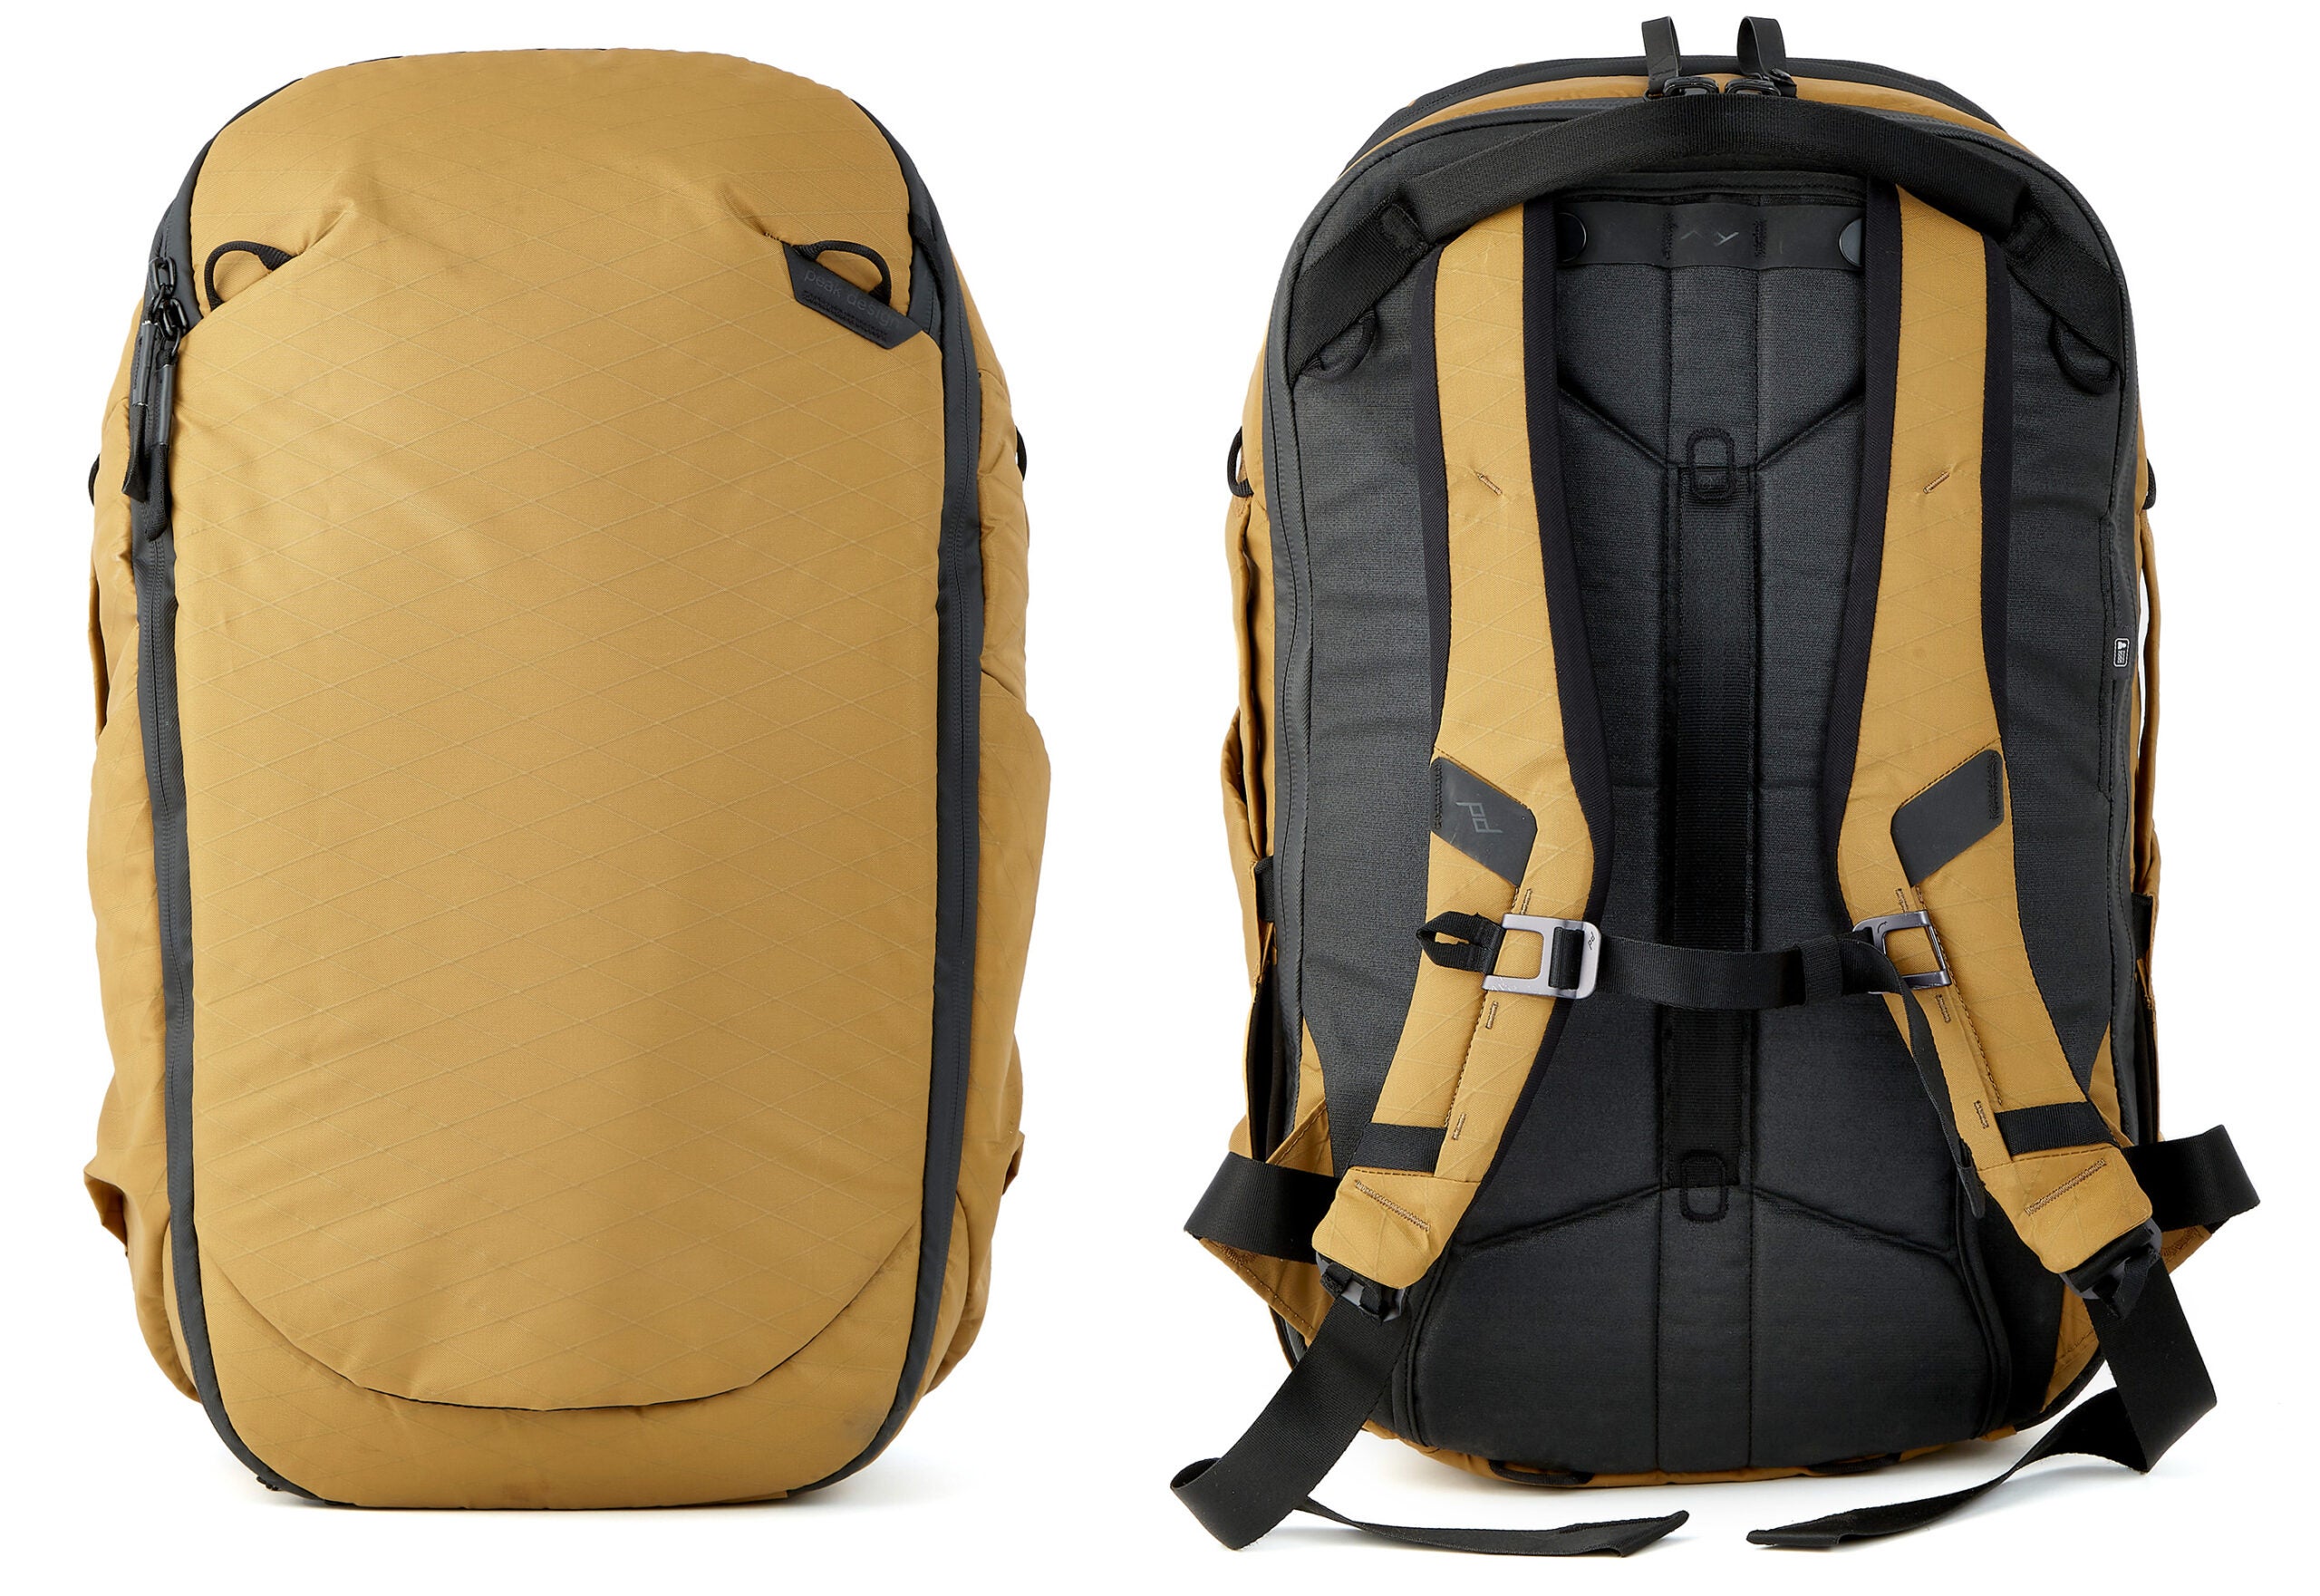 The Peak Design x Huckberry journey pack is right here